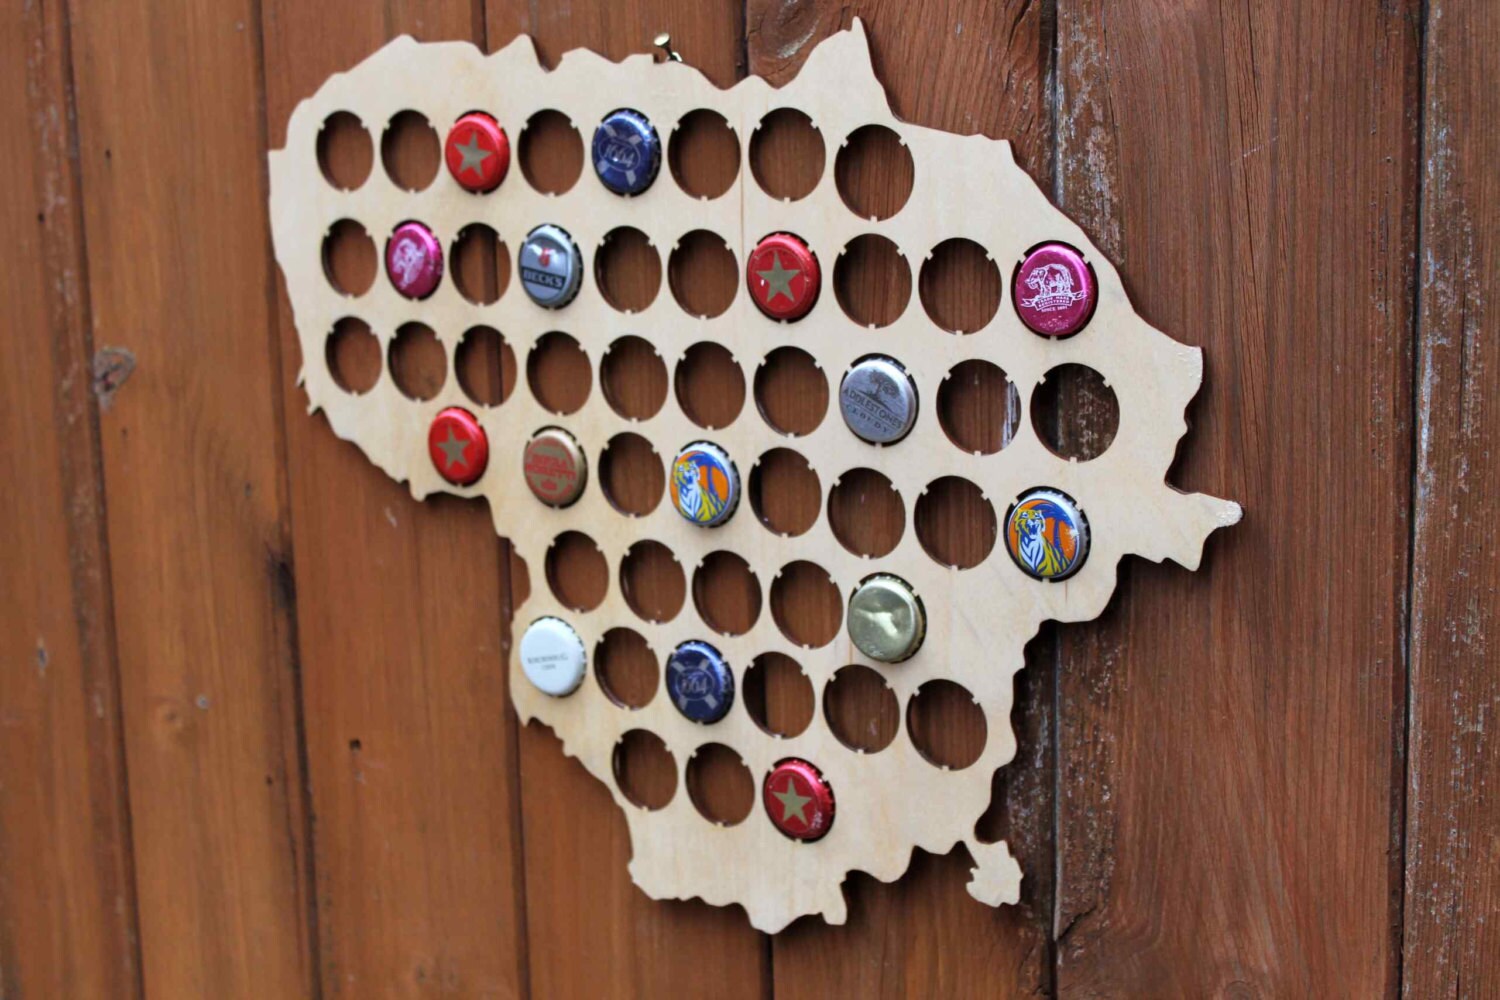 Lithuania Beer Cap Map Bottle Cap Map Collection Gift Art